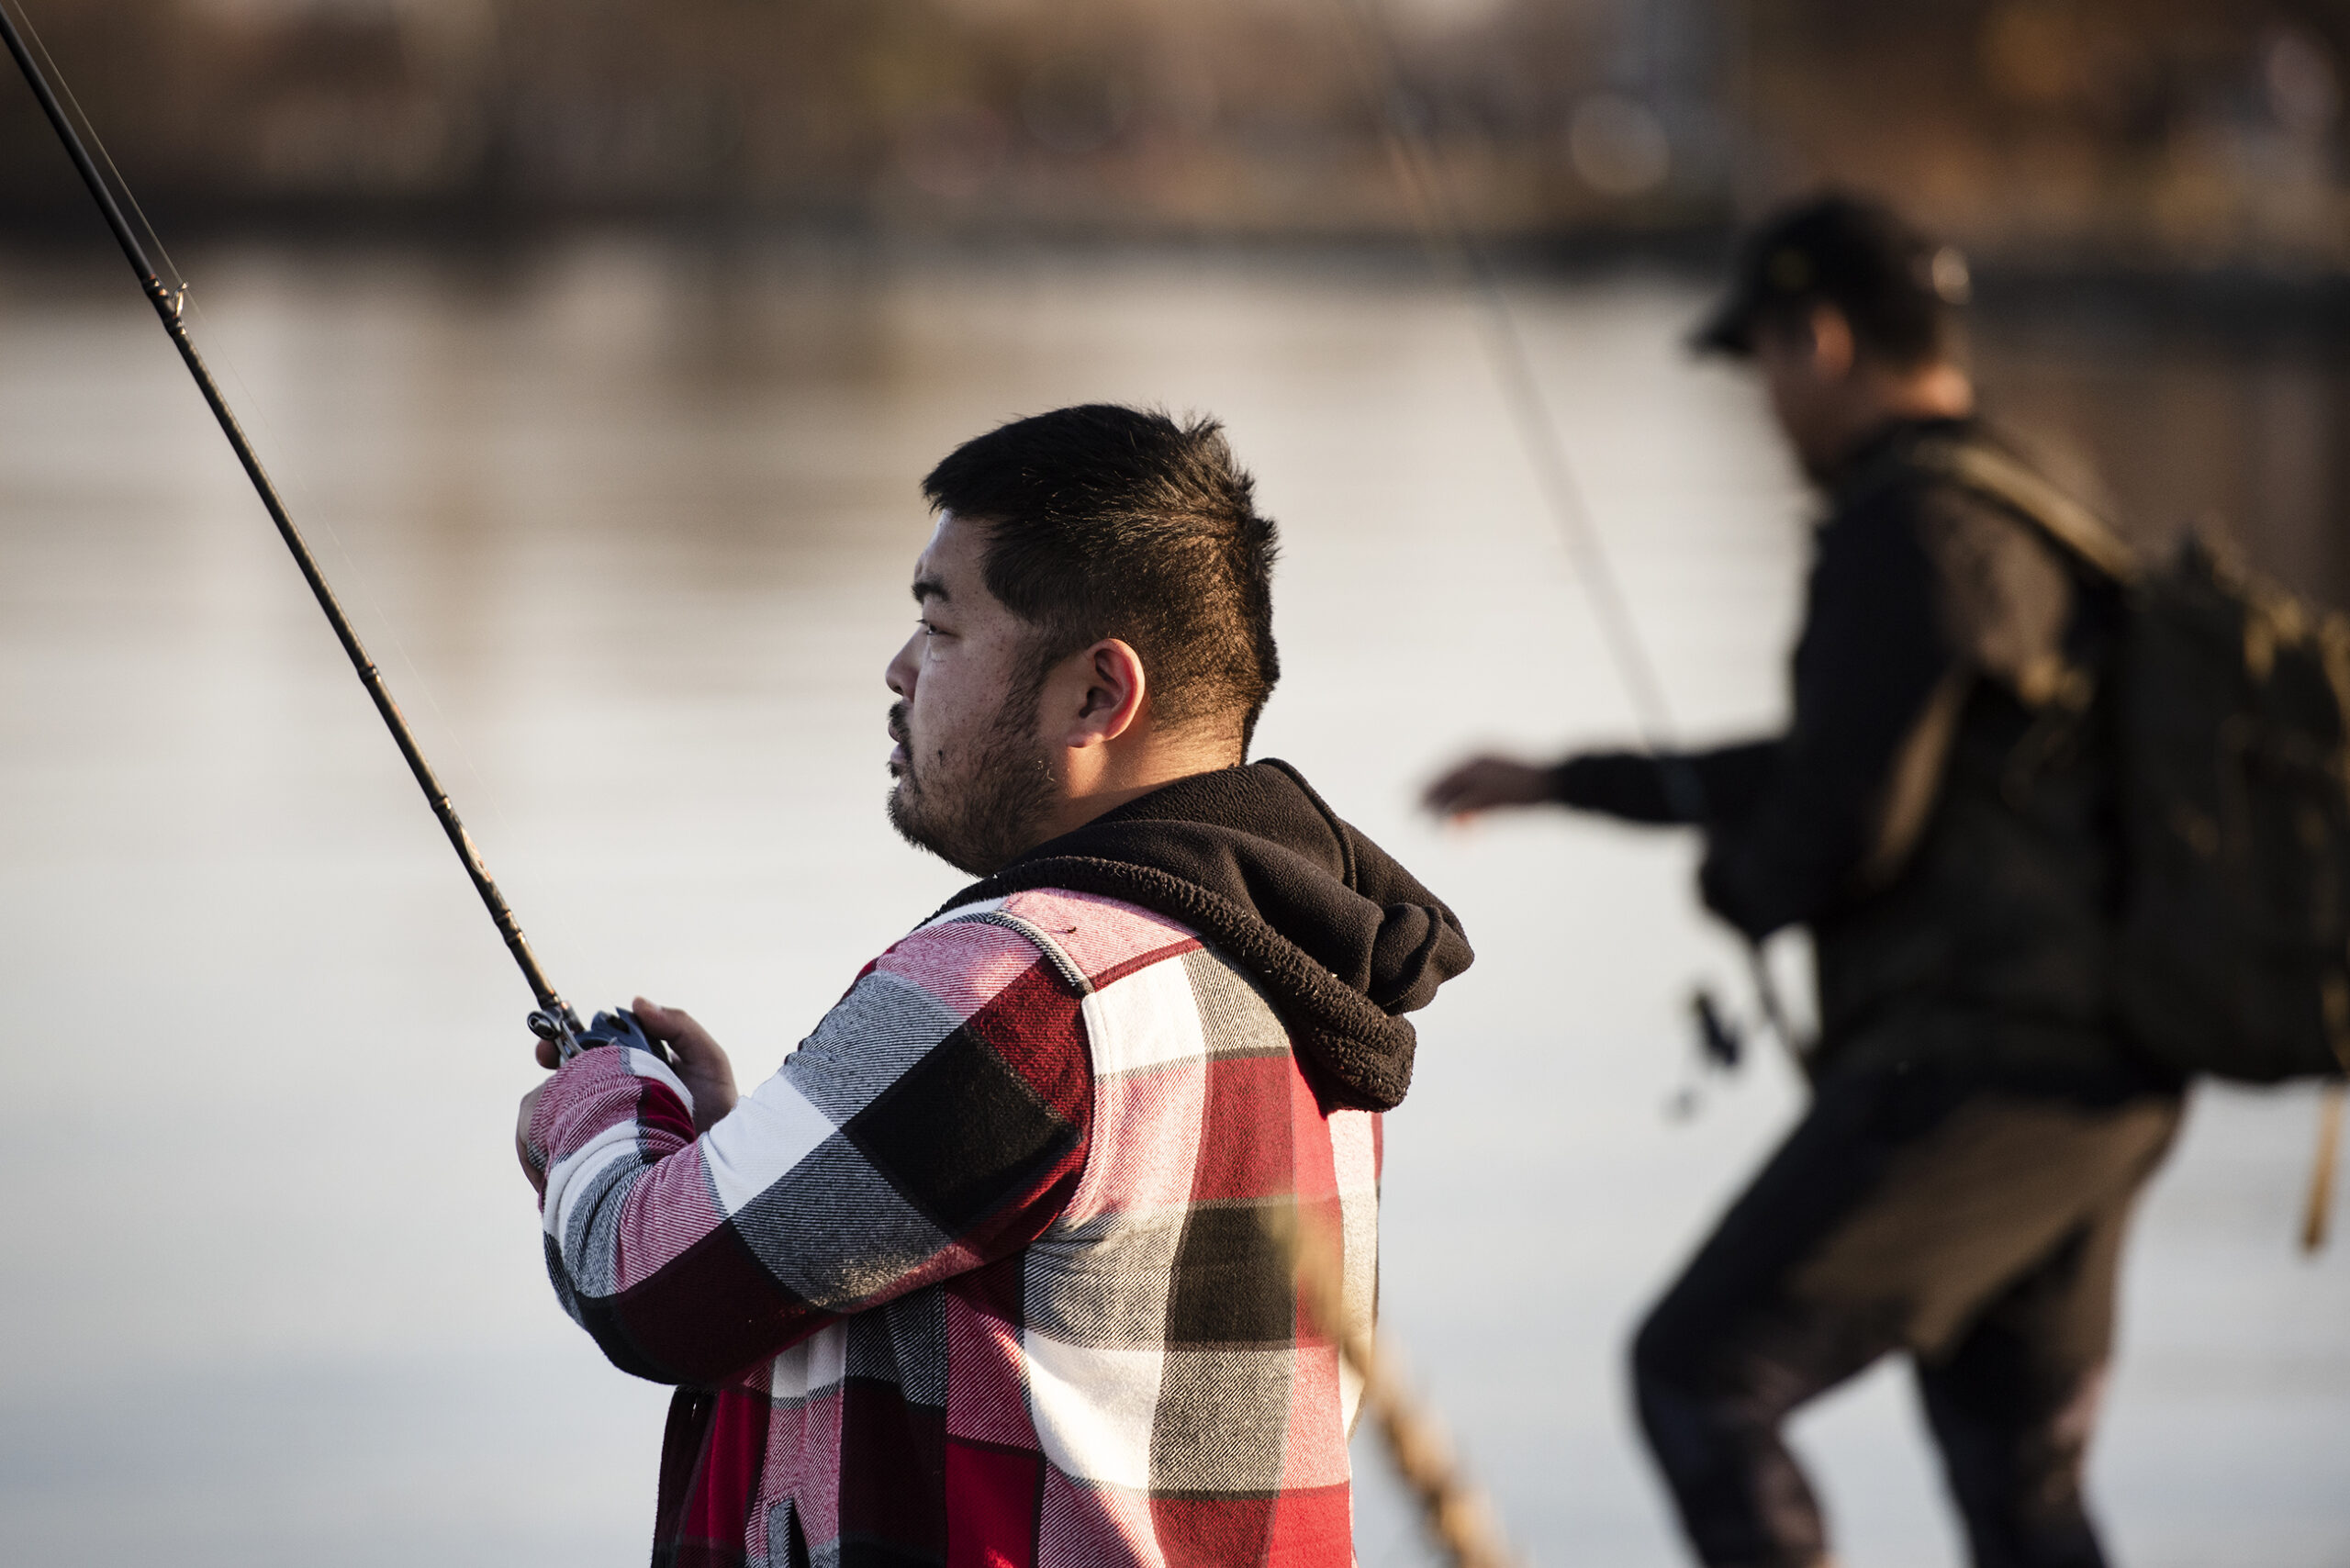 Immediate Release Becoming More Common In Fishing Tournaments - WPR